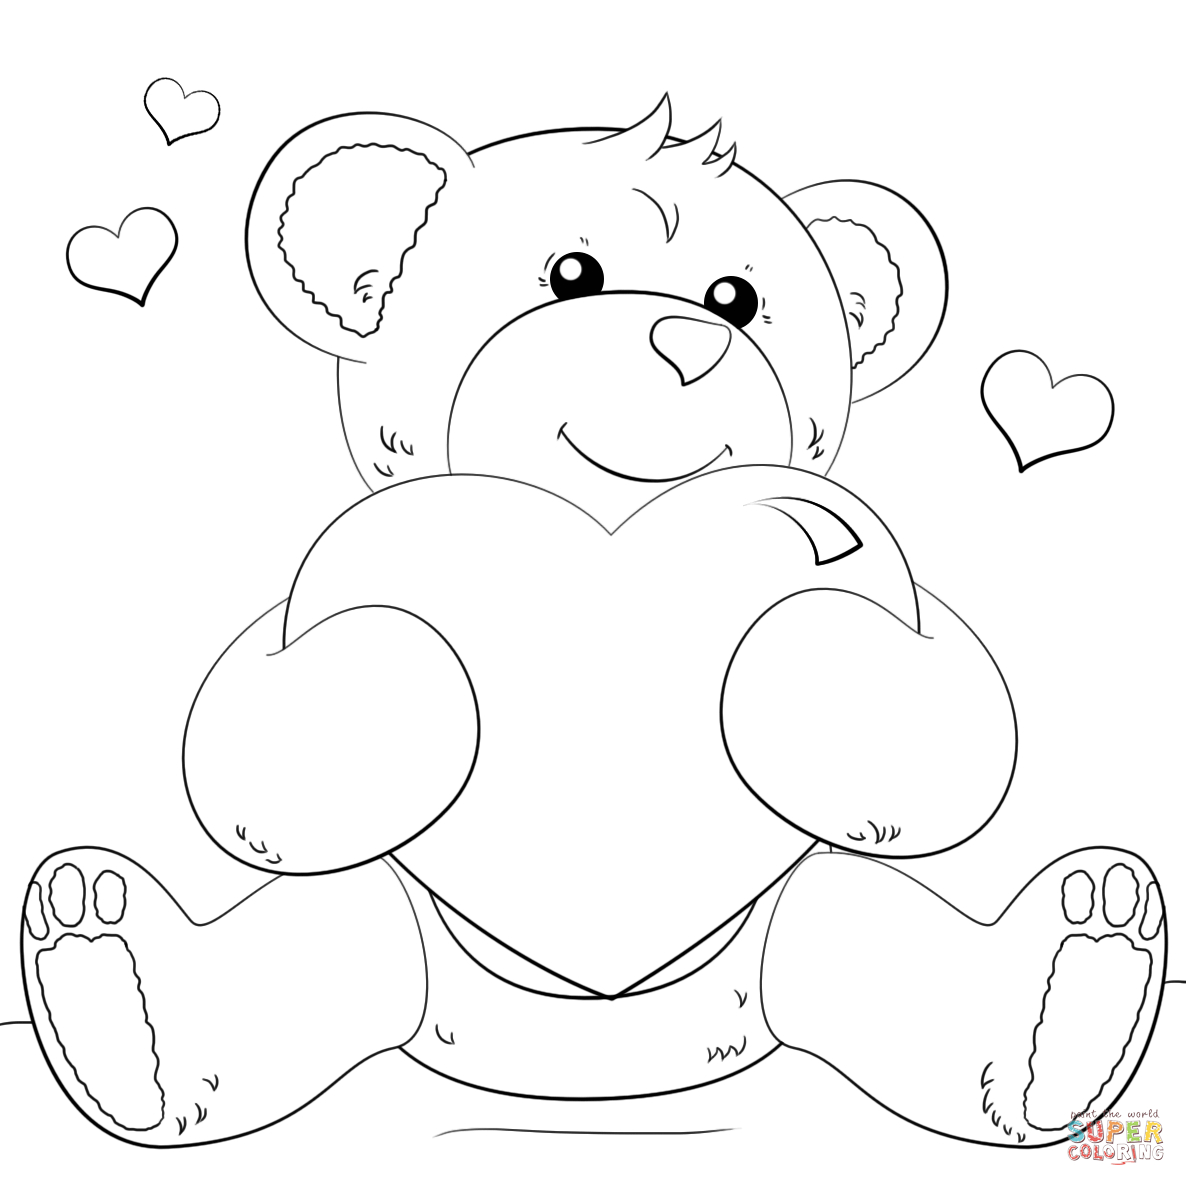 Free Coloring Pages Hearts Hearts Coloring Pages Free Coloring Pages